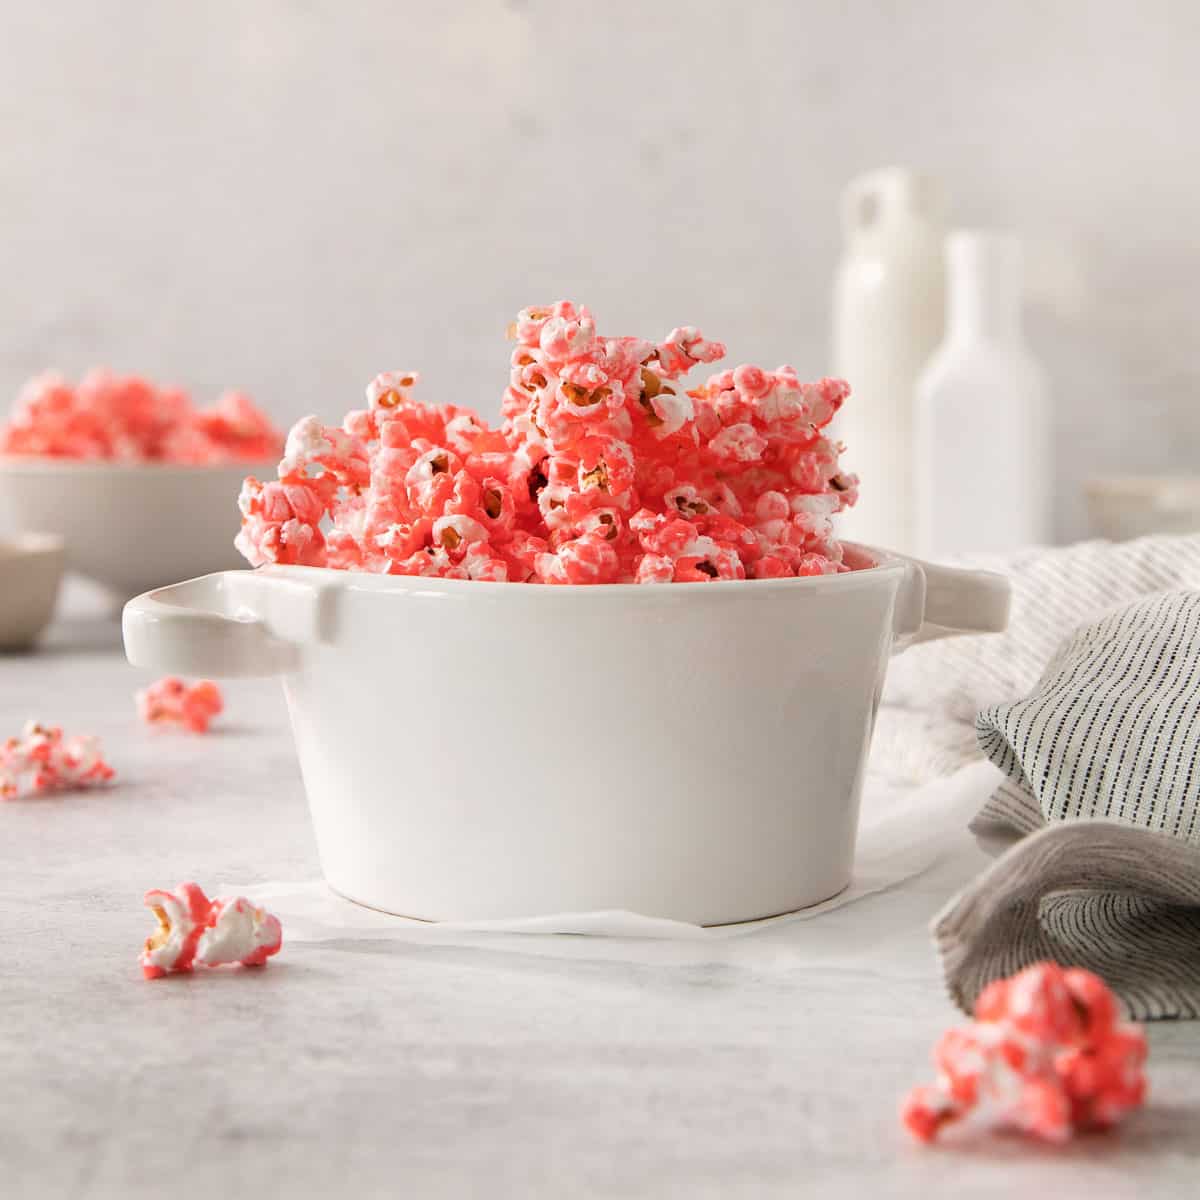 Candy popcorn in a bowl on a countertop